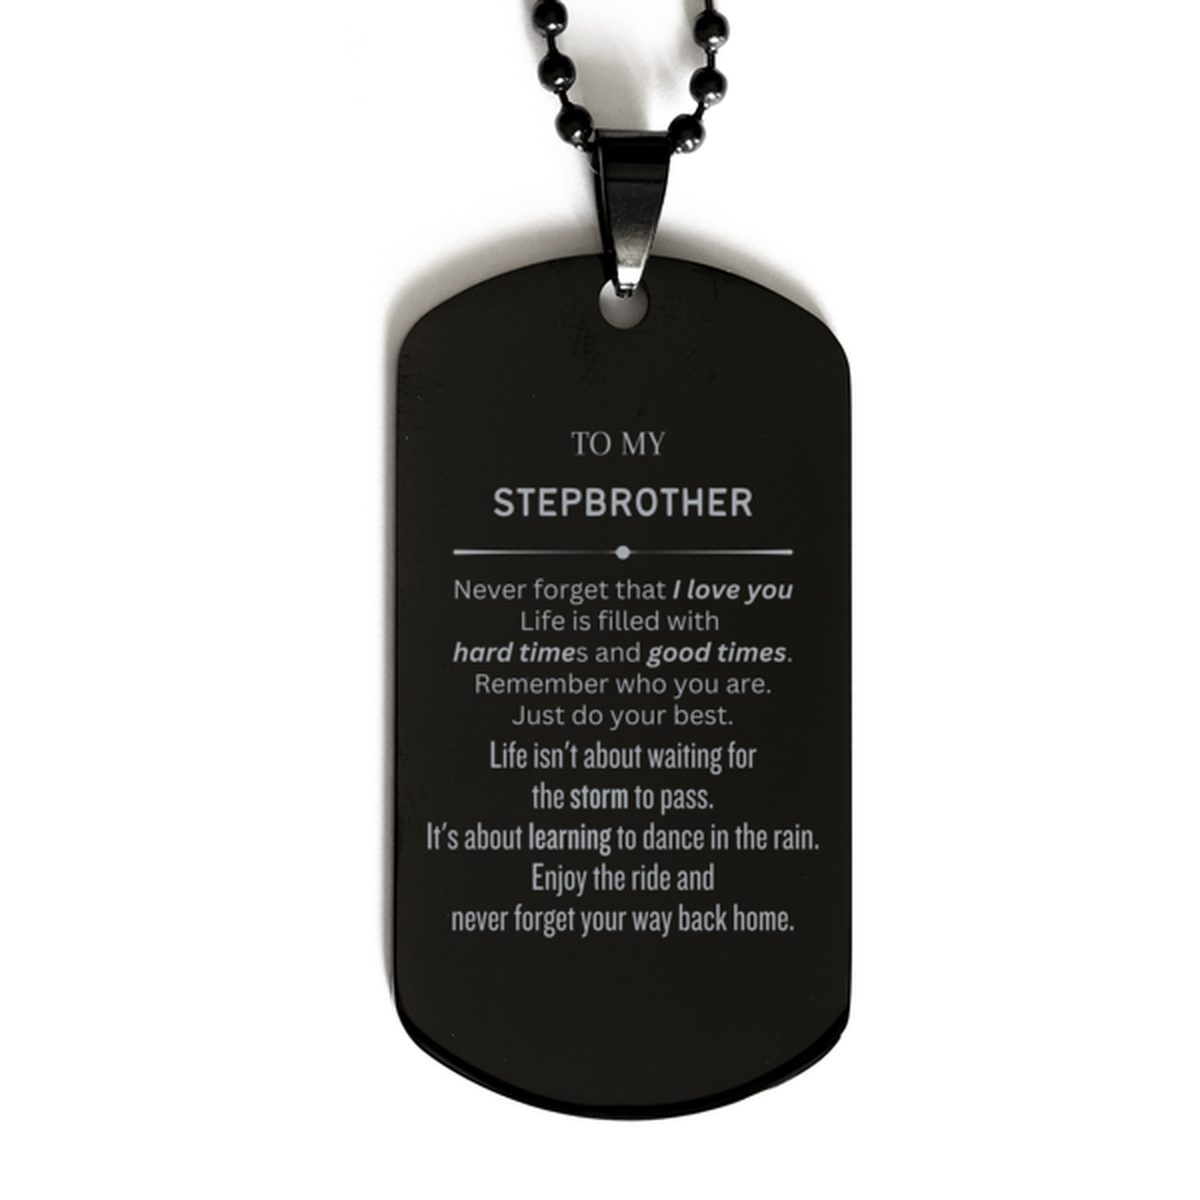 Christmas Stepbrother Black Dog Tag Gifts, To My Stepbrother Birthday Thank You Gifts For Stepbrother, Graduation Unique Gifts For Stepbrother To My Stepbrother Never forget that I love you life is filled with hard times and good times. Remember who you a